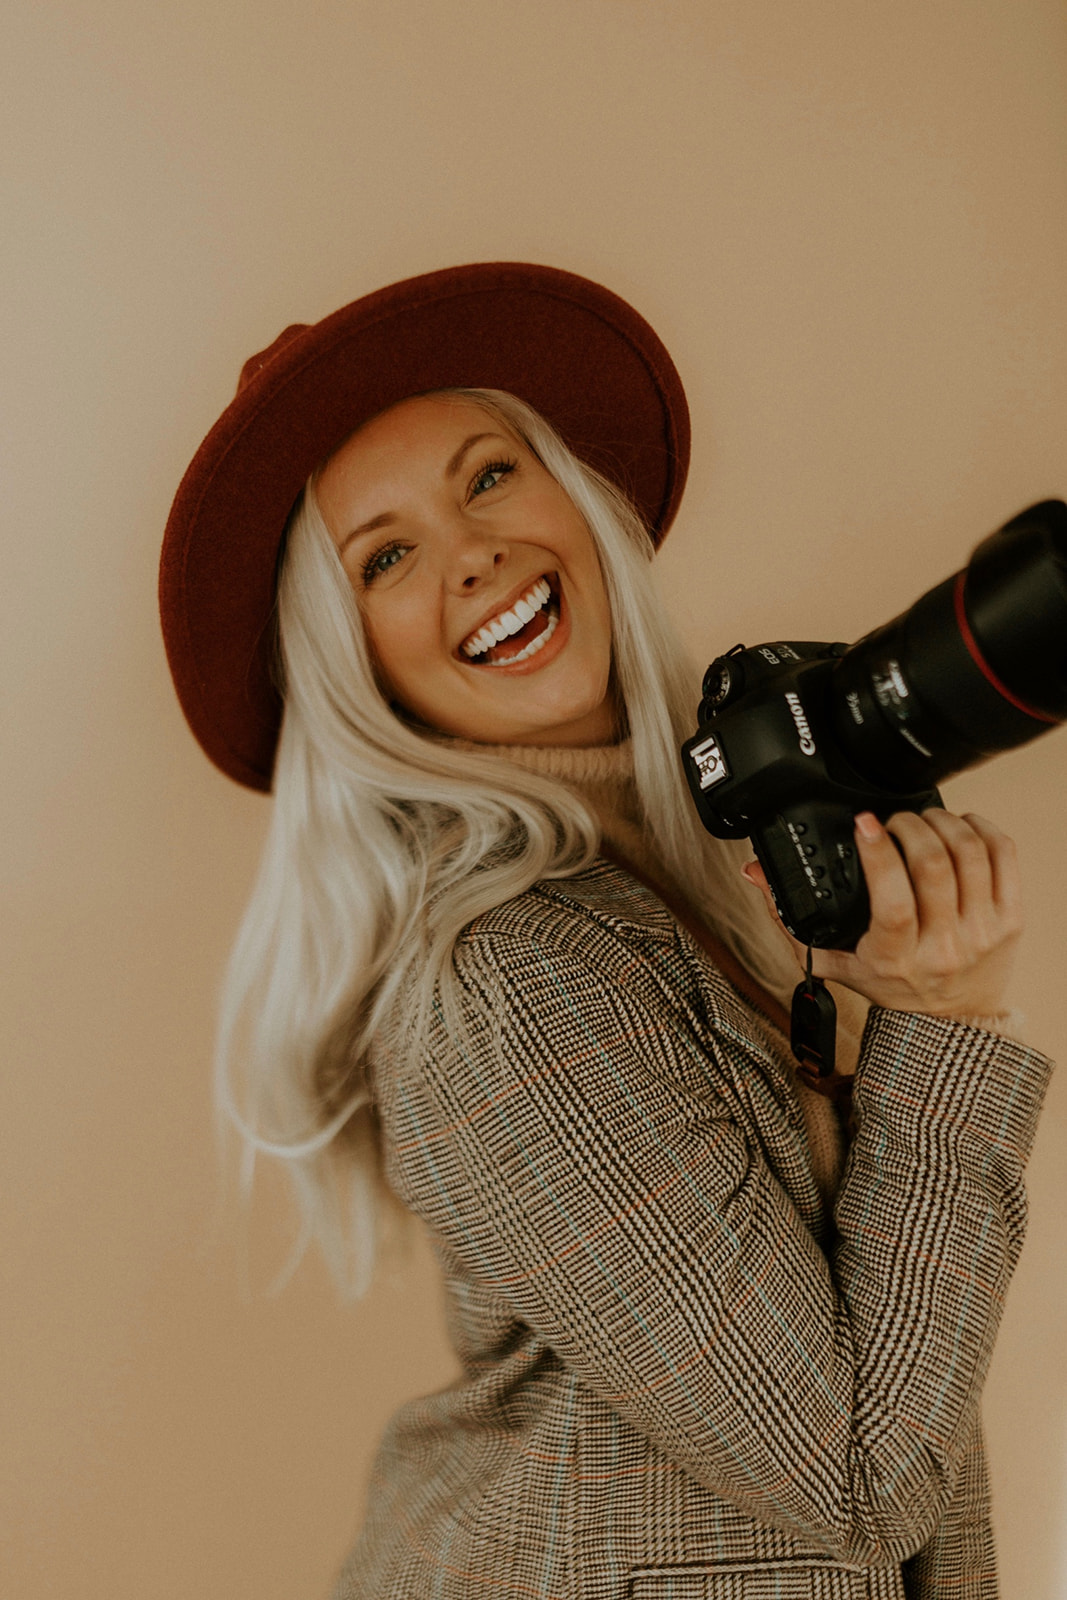 Travel photographer McKenna Christine smiling at the camera with her Canon camera in hand